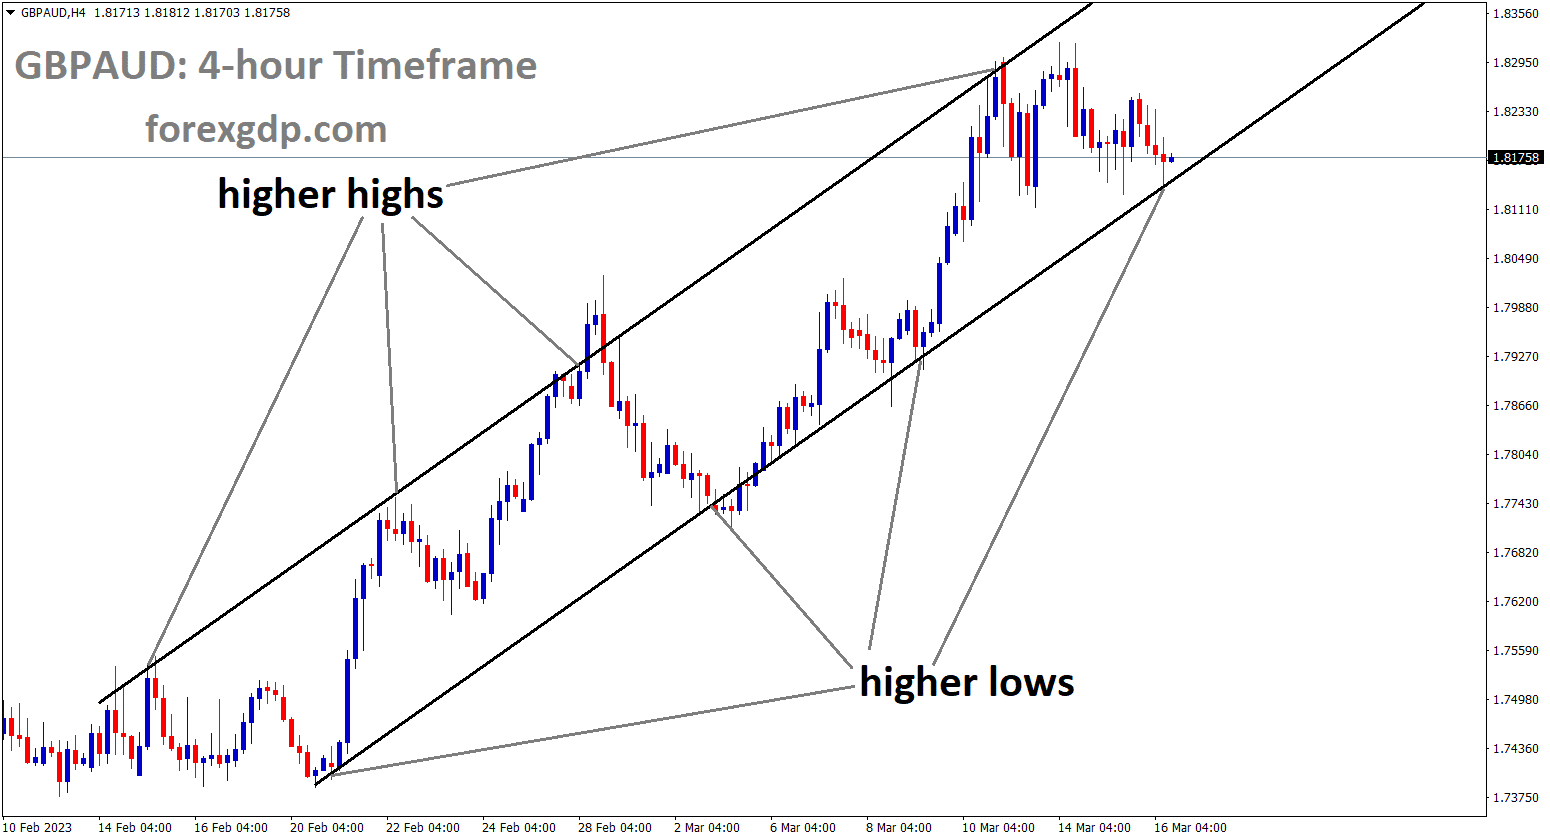 GBPAUD is moving an Ascending channel and the market has reached the higher low area of the channel.